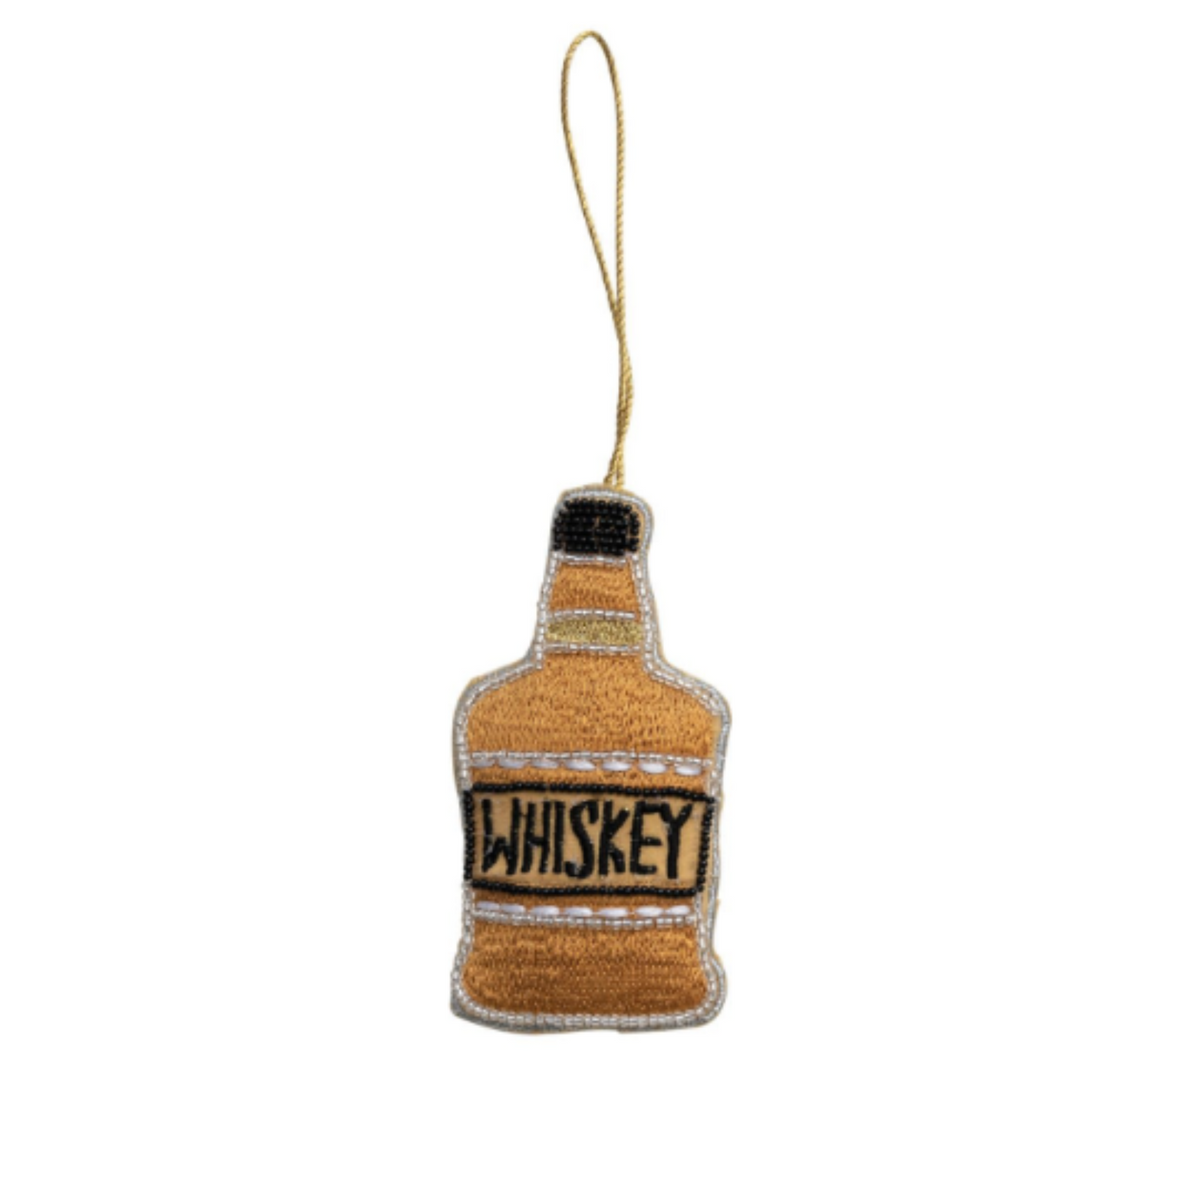 Imperfect Fabric Whiskey Bottle Ornament w/ Embroidery &amp; Beads